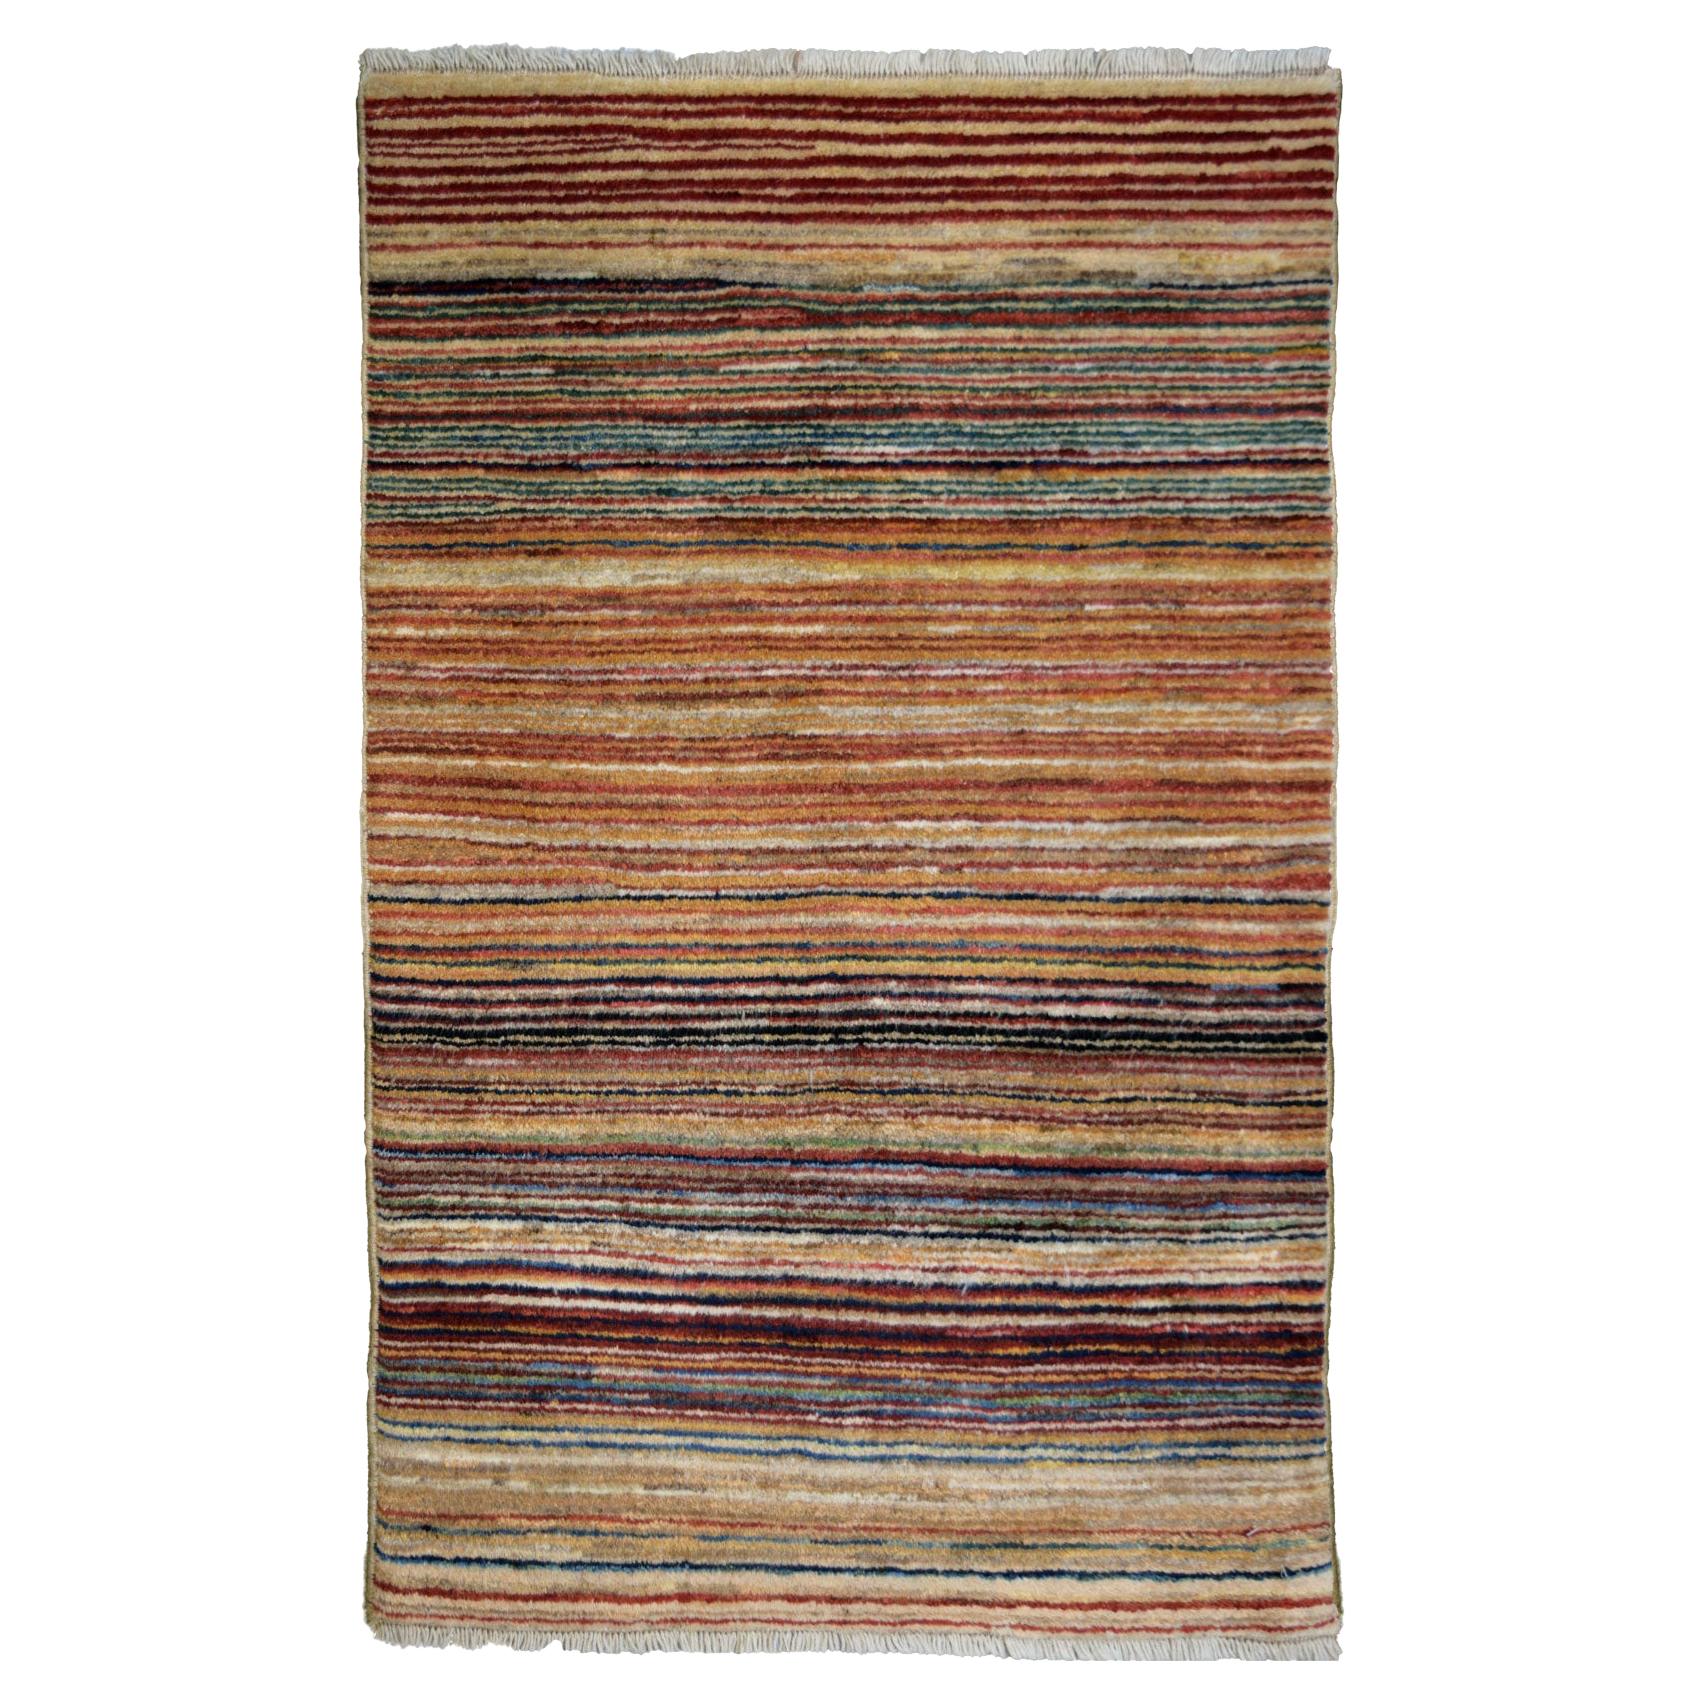 Persian Qashqai Tribal Rug, Hand-Knotted Multicolor Stripes, 3x4